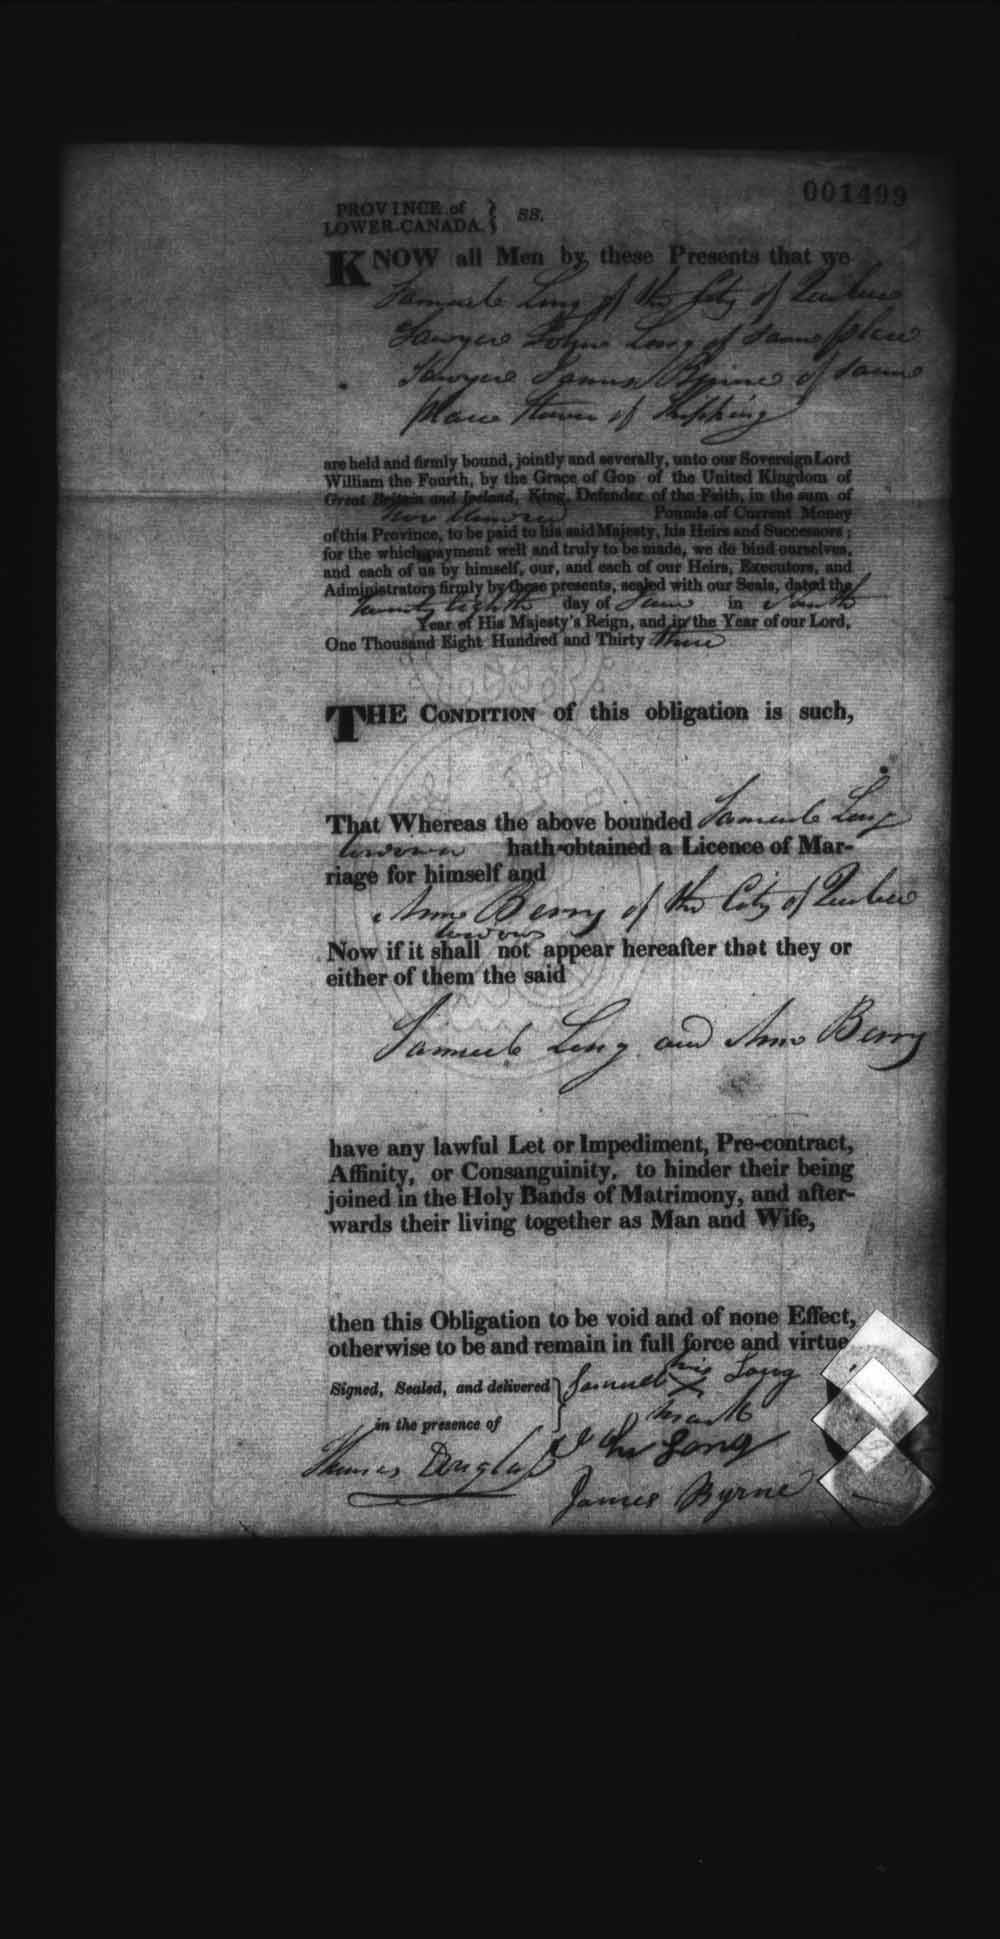 Digitized page of Upper and Lower Canada Marriage Bonds (1779-1865) for Image No.: e008237788